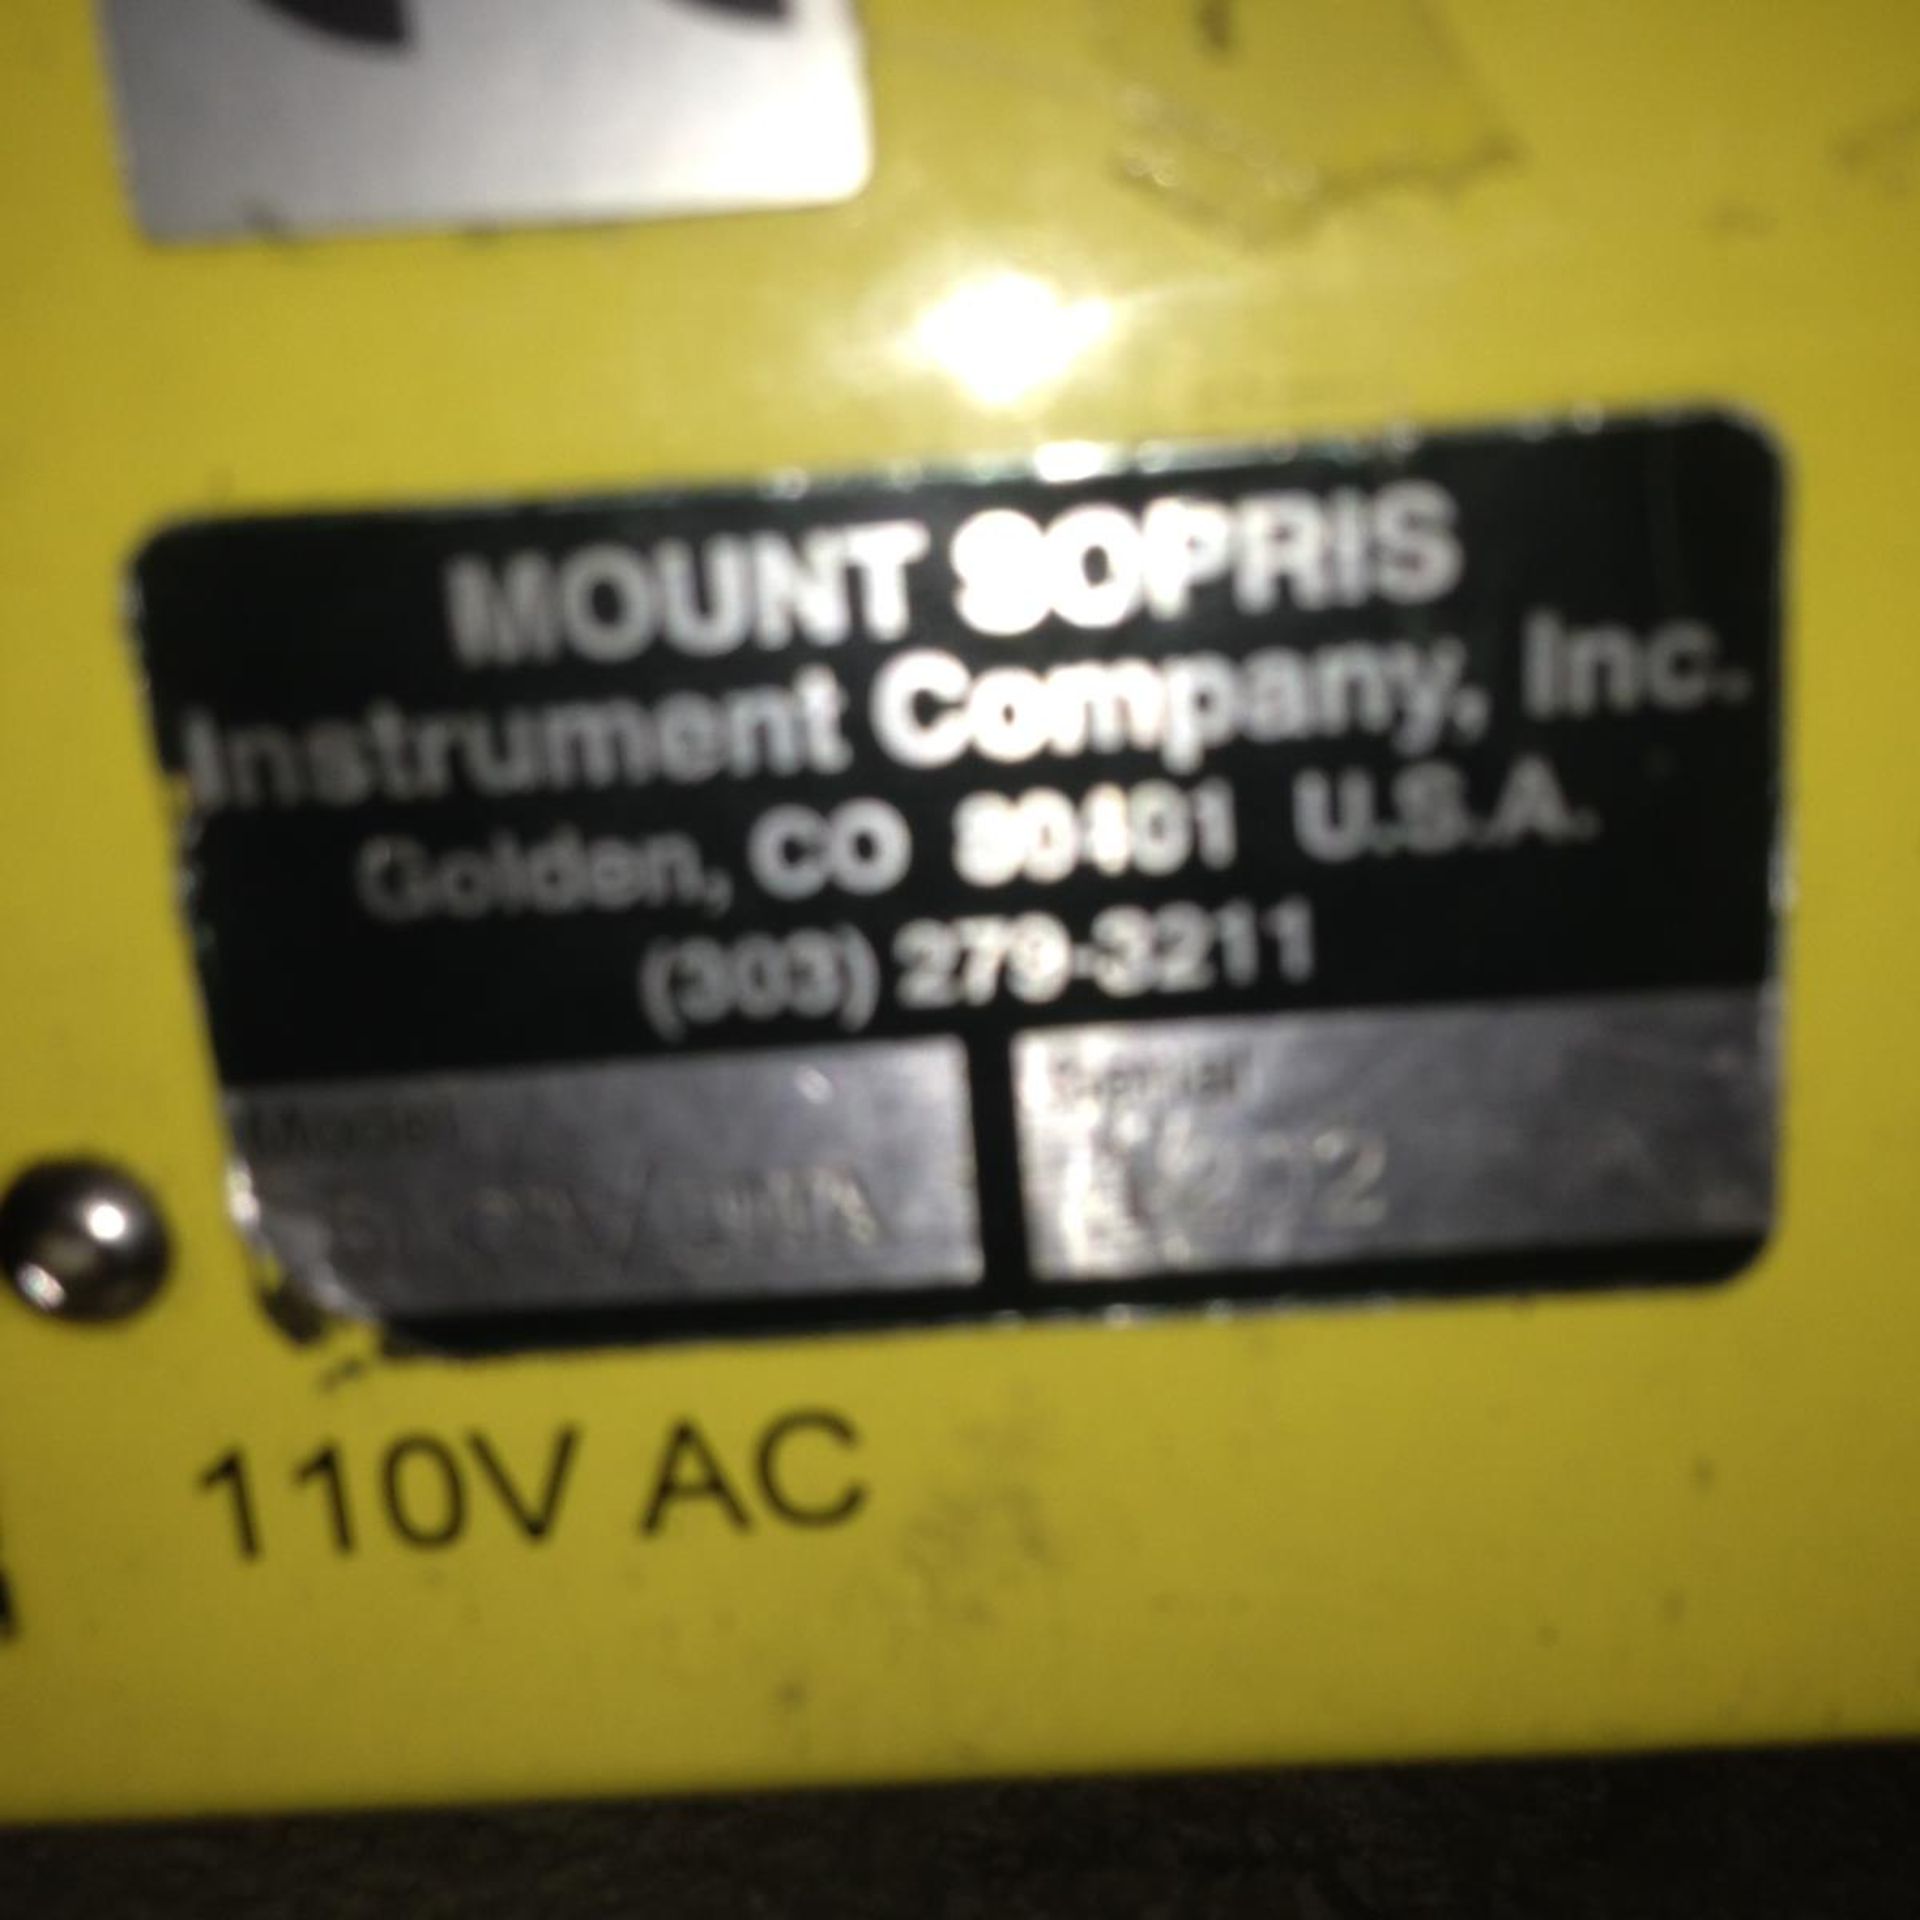 Mount sopris instruments , mgx 11 digital logging system , 3 units in total with cases . - Image 5 of 5